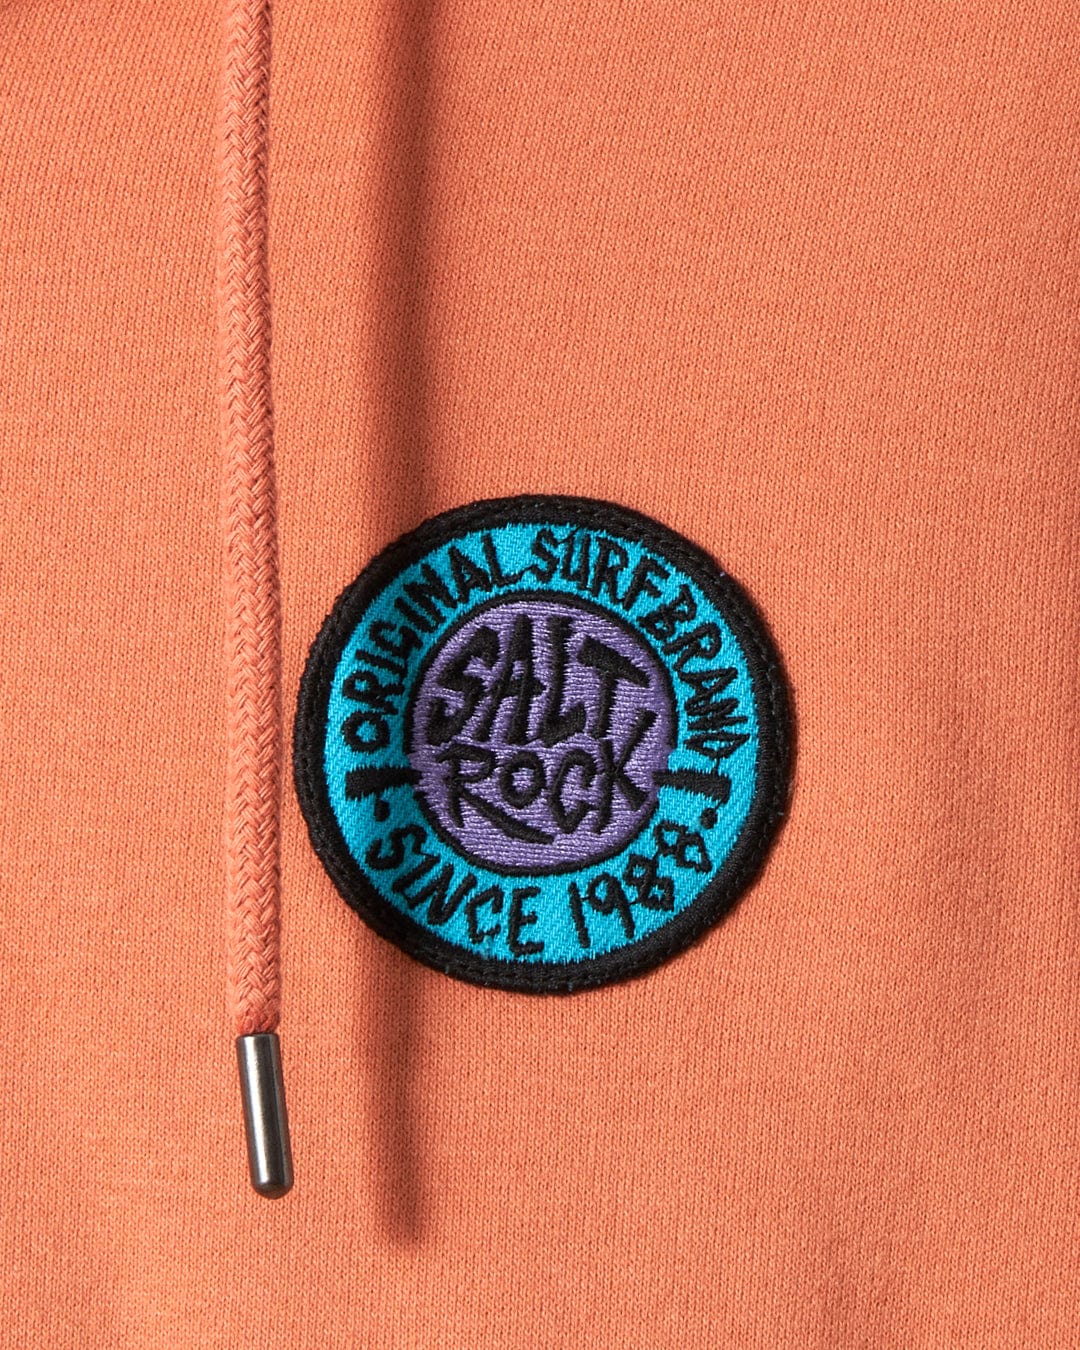 Close-up of a black circular patch reading "Saltrock original Saltrock retro surf since 1989" stitched onto an orange SR Original - Recycled Mens Zip hoodie, with a drawstring visible.